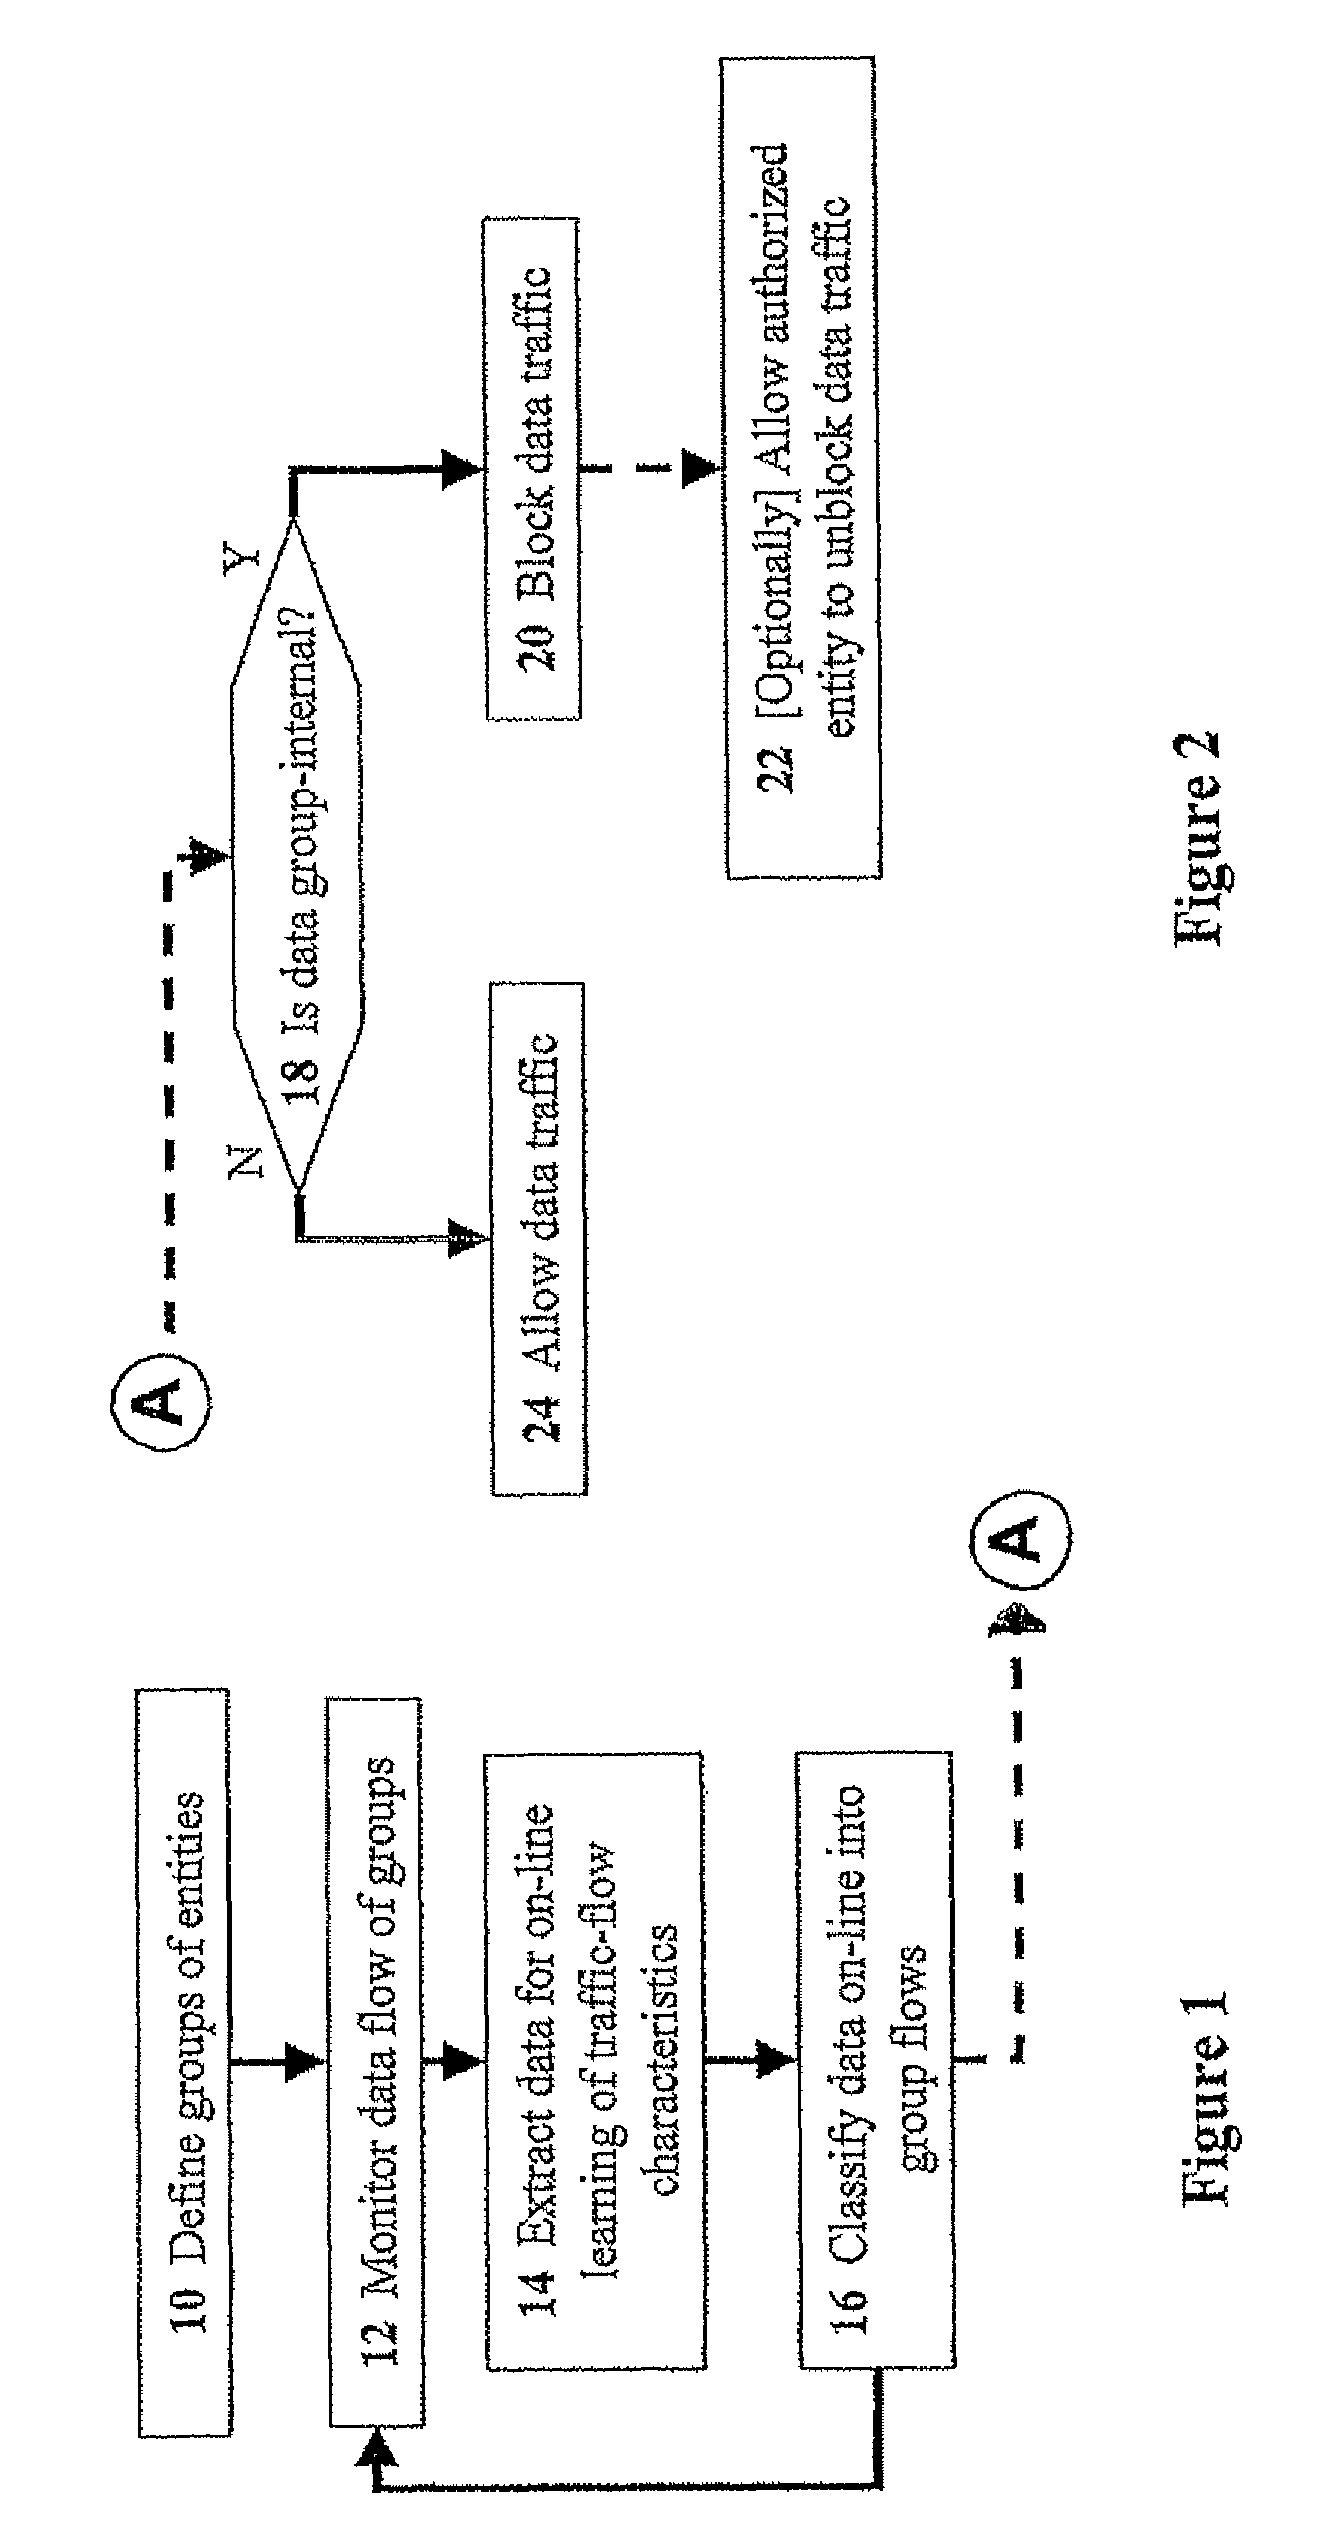 Methods for automatic categorization of internal and external communication for preventing data loss